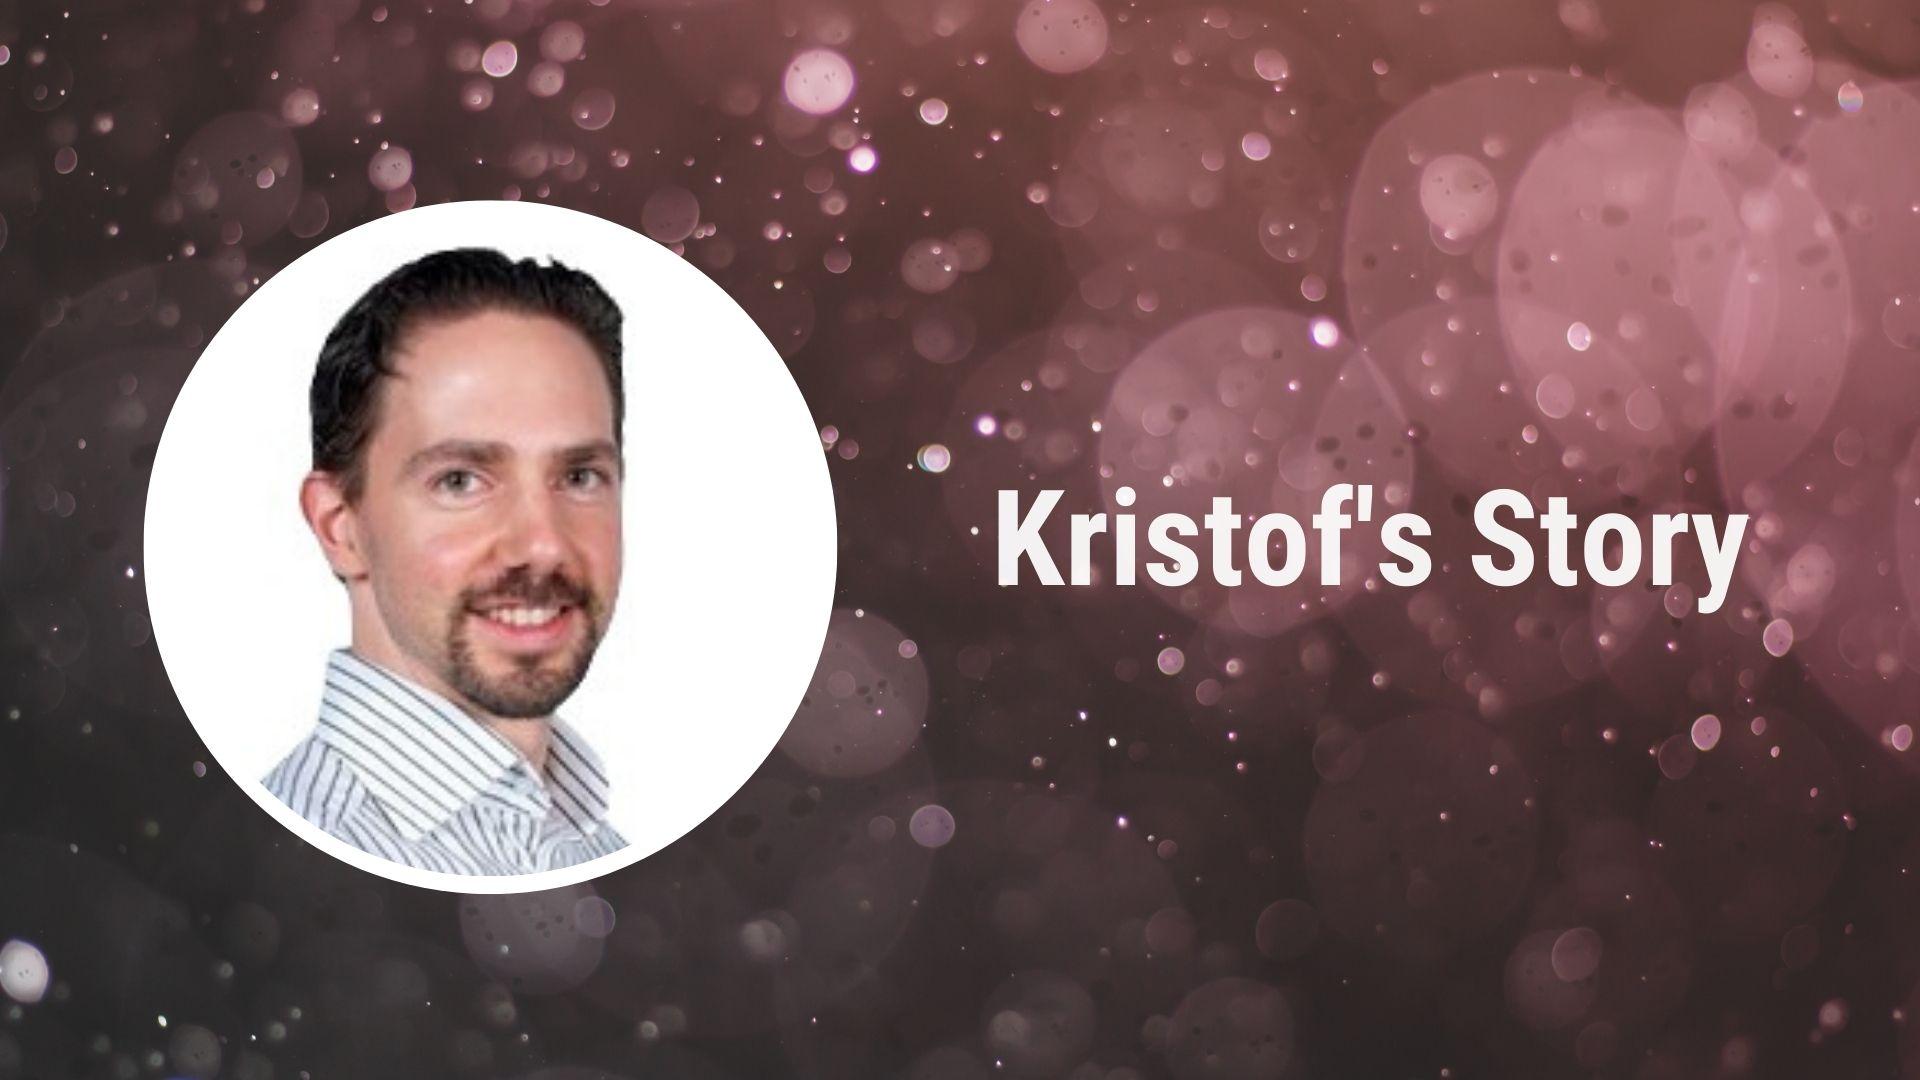 Kristof’s story: We only hire fun people